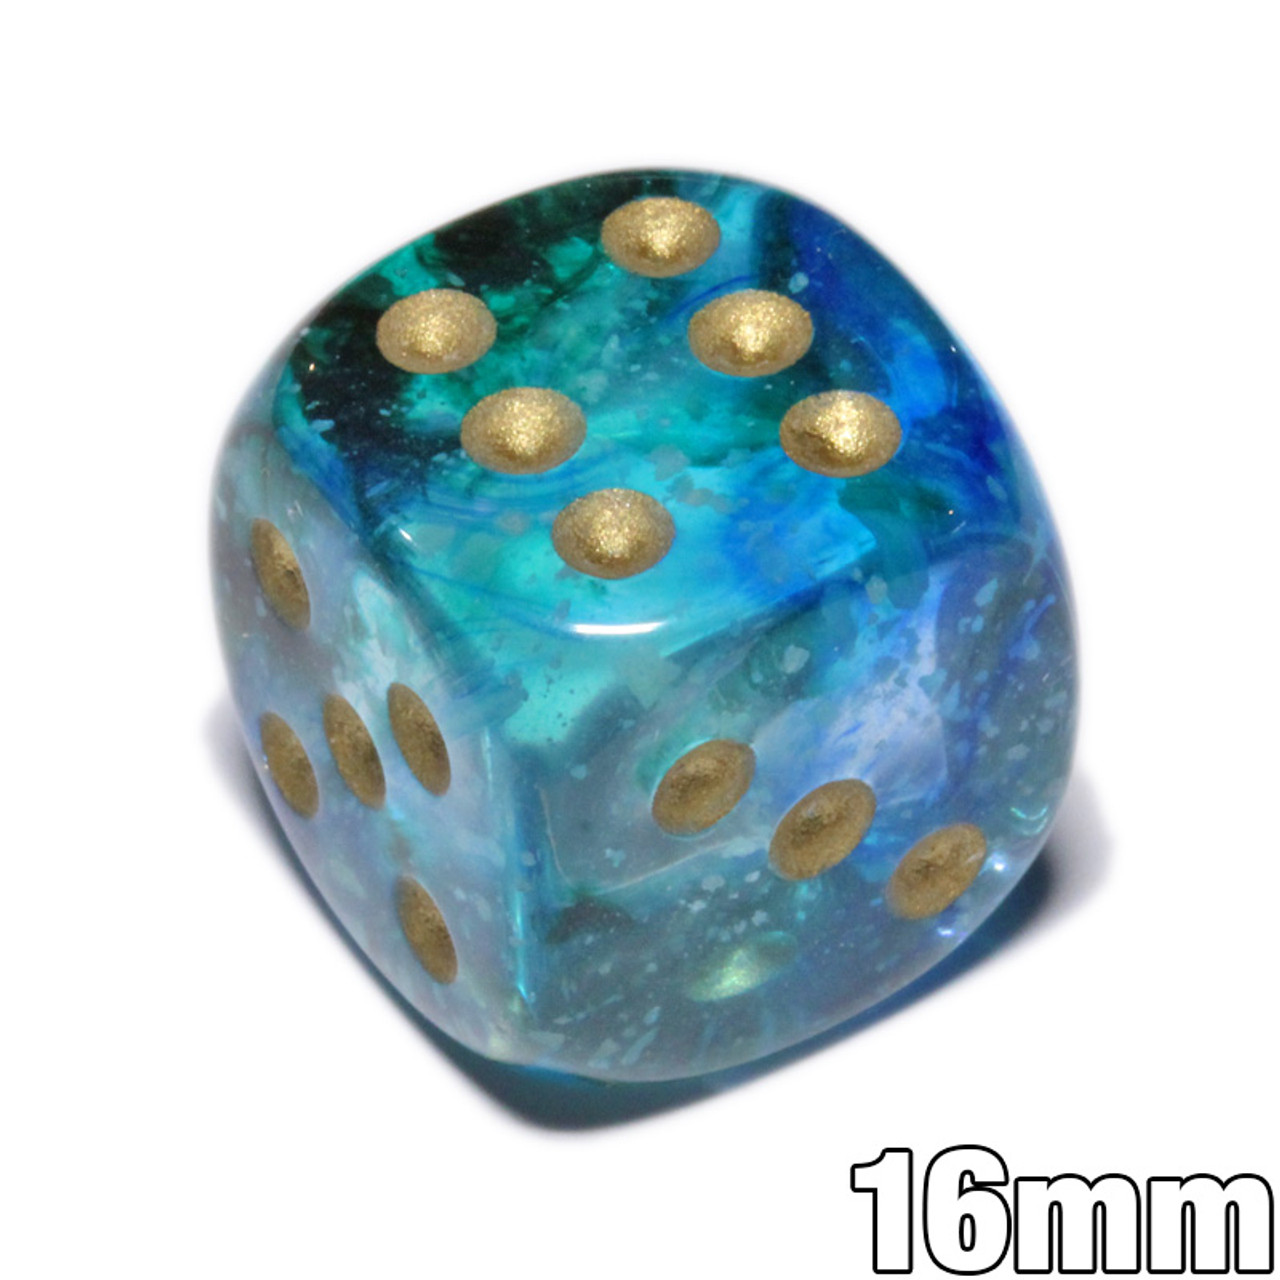  Gemini Dice Block, Set of 12 Size D6 Dice Designed for Board  Games, Roleplaying Games and Miniature Games, Premium Quality 16 mm Dice